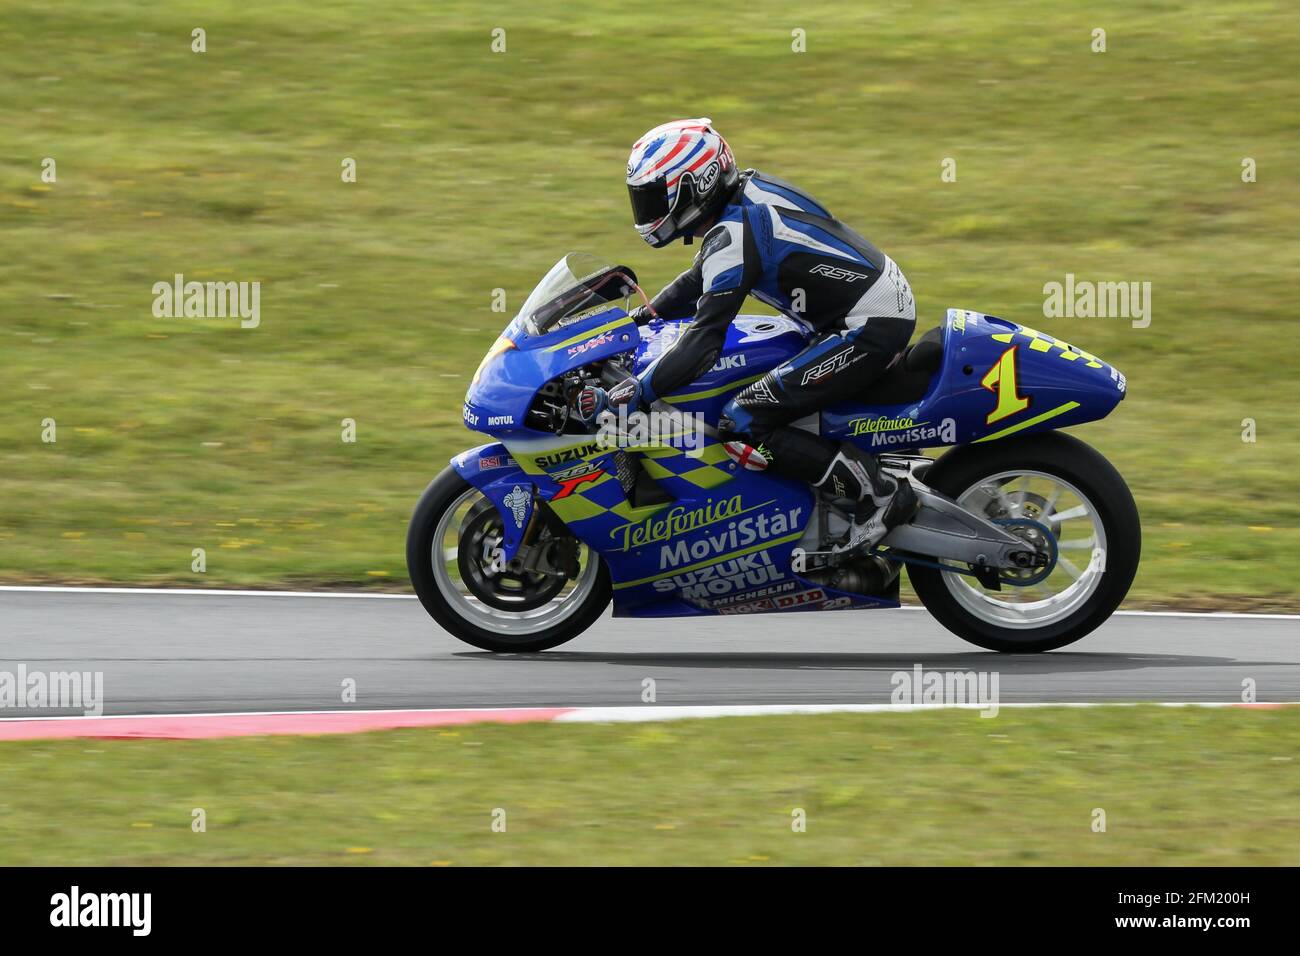 Suzuki RGV 500GP in Kenny Roberts Jnr. Telefonica Moviestar livery approaches The Gooseneck at the Cadwell Park International Classic in July 2015 Stock Photo